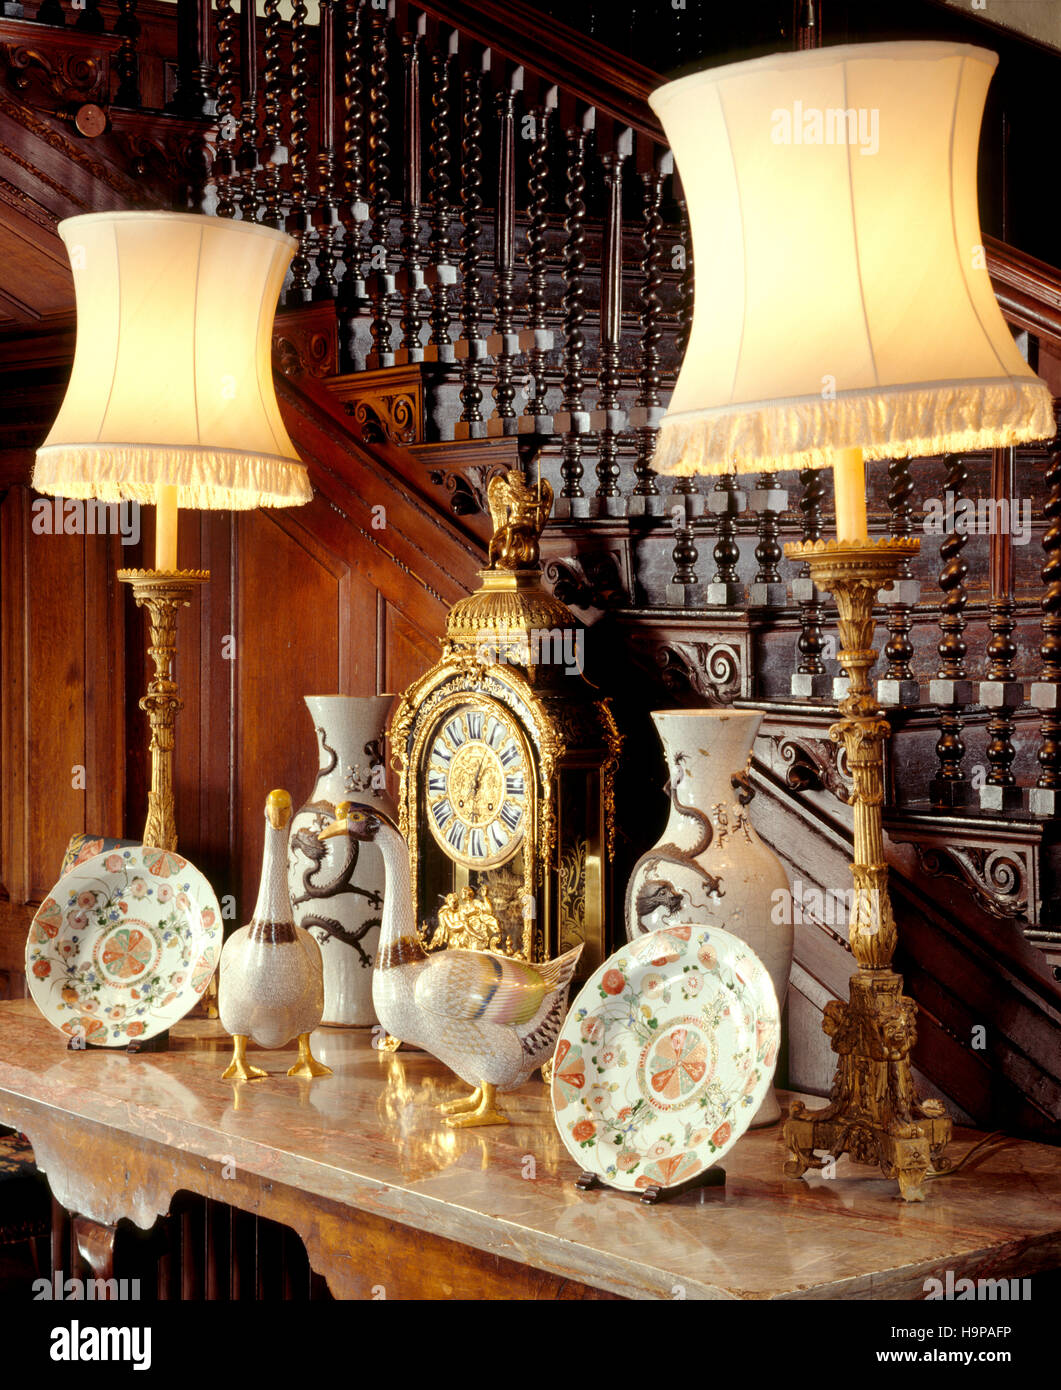 Partial view of the Inner Hall at Antony House showing the marble top table, ceramic geese, clock, table lamps, vases and plates. Stock Photo